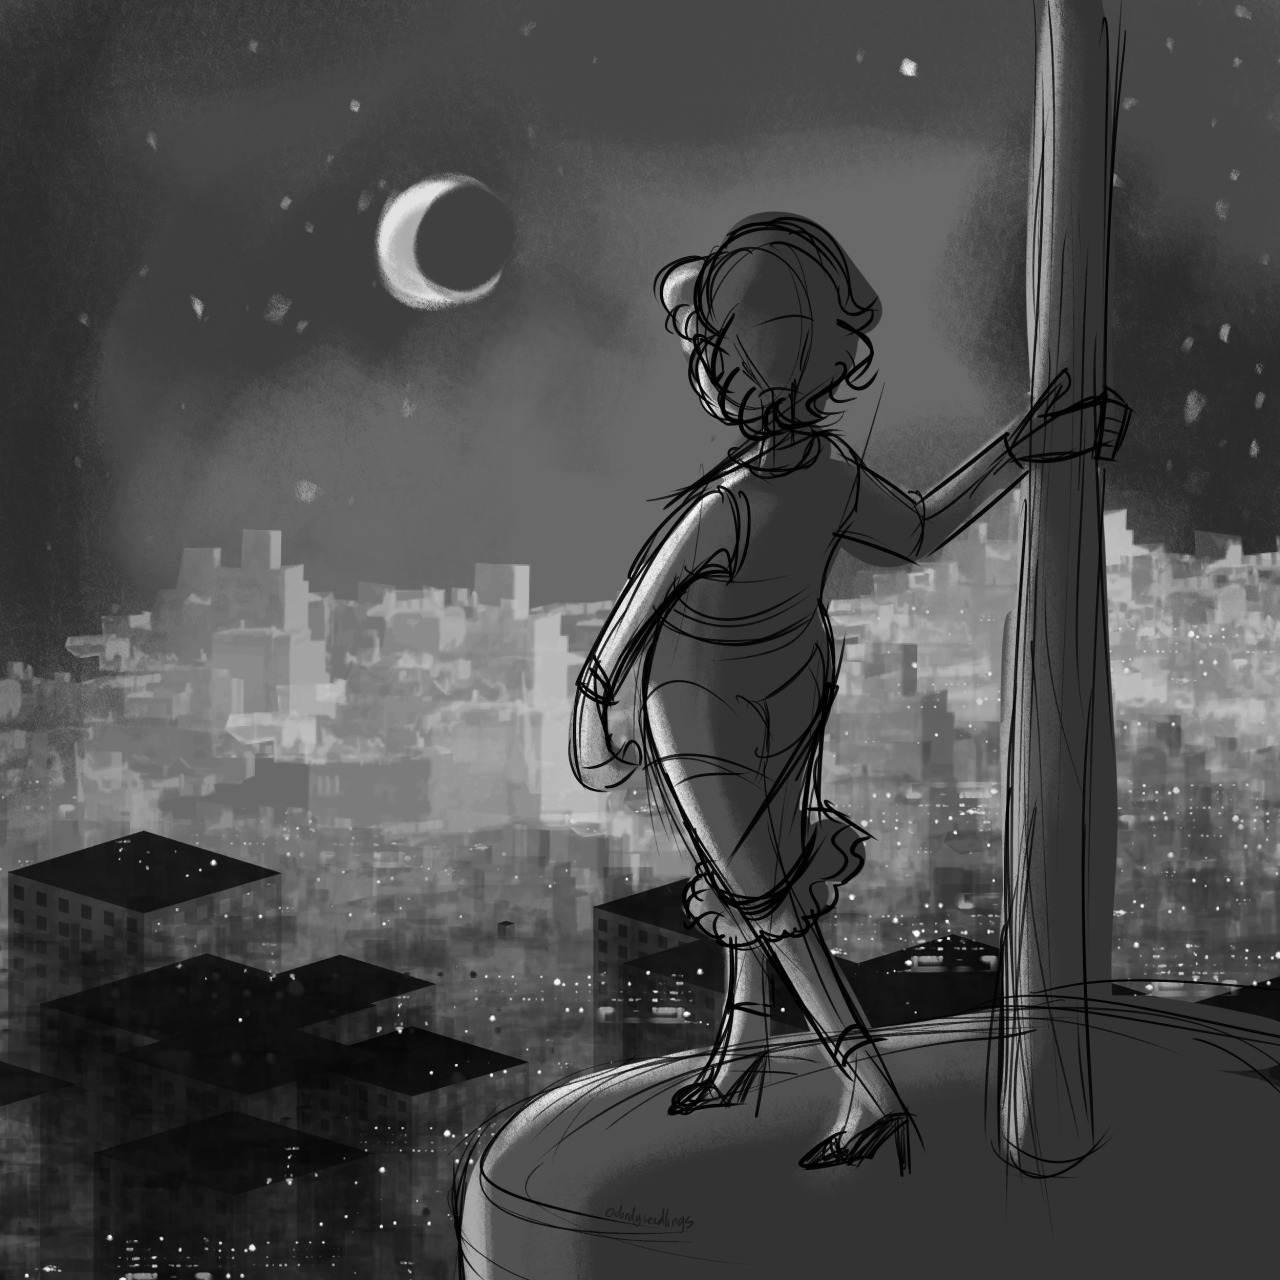 there is something here. there is someone here.

[image id: a sketch of sophie bicicleta from the unsleeping city. the camera is showing the back of her standing on the empire state building, holding onto a pole and looking out at the rest of the city below. end id.] #the unsleeping city #tuc#dimension 20#d20#sophie bikes#sophia lee#sophia bicicleta#dandydoodles #this moment drives me so fucking crazy  #SOPHIA BICICLETA CHOSEN ONE  #SHE CHOSE TO BE THE CHOSEN ONE......... SCREAMS  #SHE TOOK THE DREAM OF THE CHOSEN ONE AND SLAMMED IT AGAINST THE EARTH AND SAID ITS ME  #IM ON THE TOWER  #I AM HERE  #SCREAMS. SCREAMS. SCREAMS.